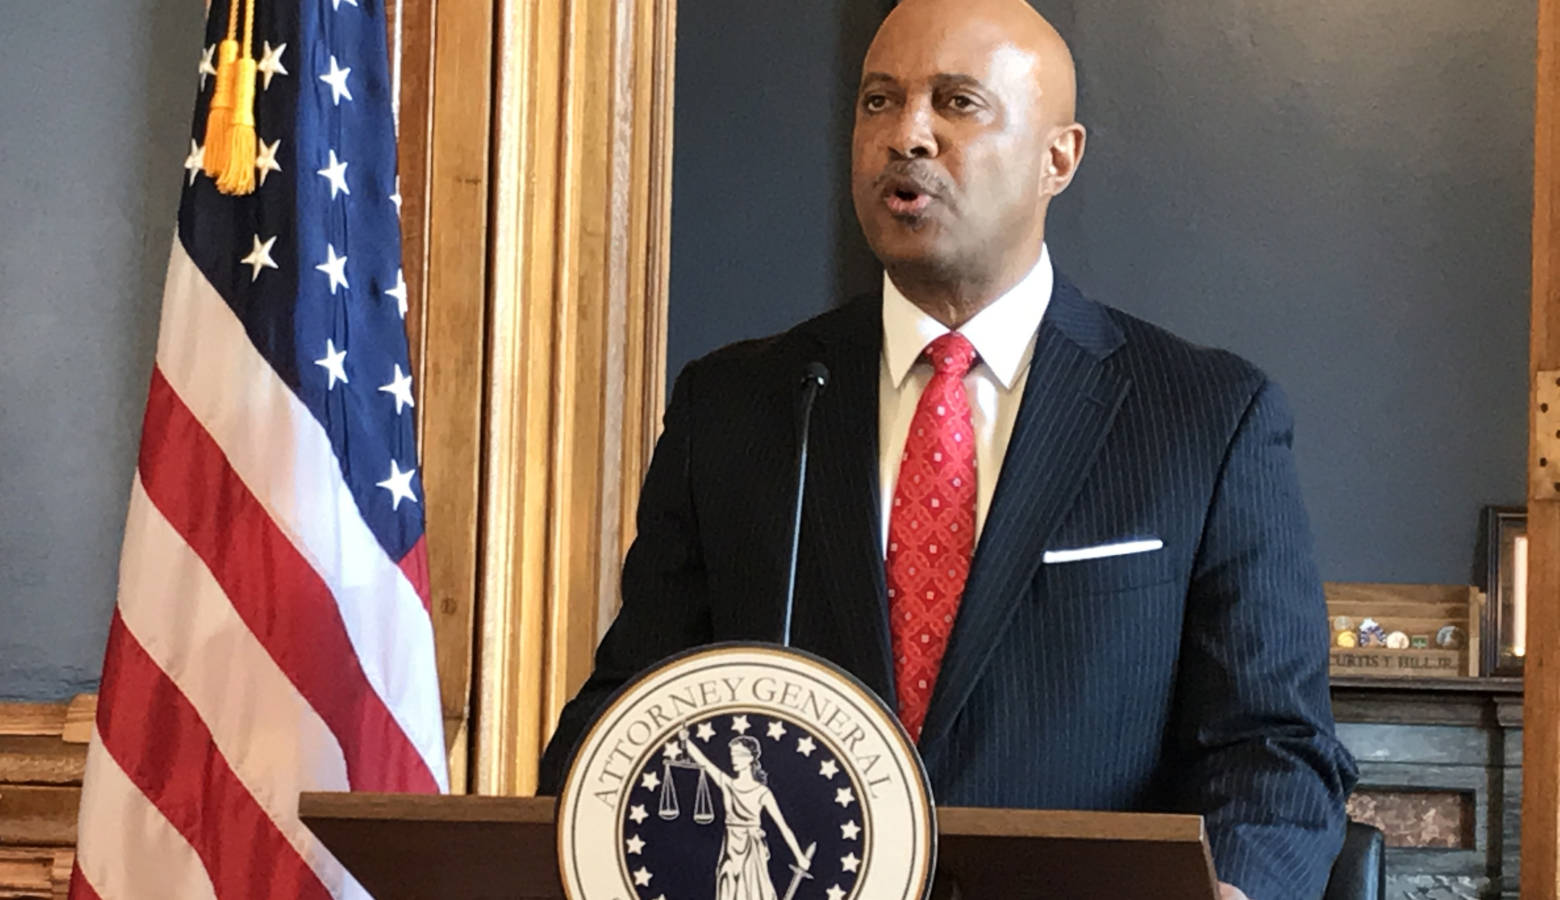 Attorney General Curtis Hill addresses the media in 2018 in the wake of allegations he groped four women. (FILE PHOTO: Brandon Smith/IPB News)